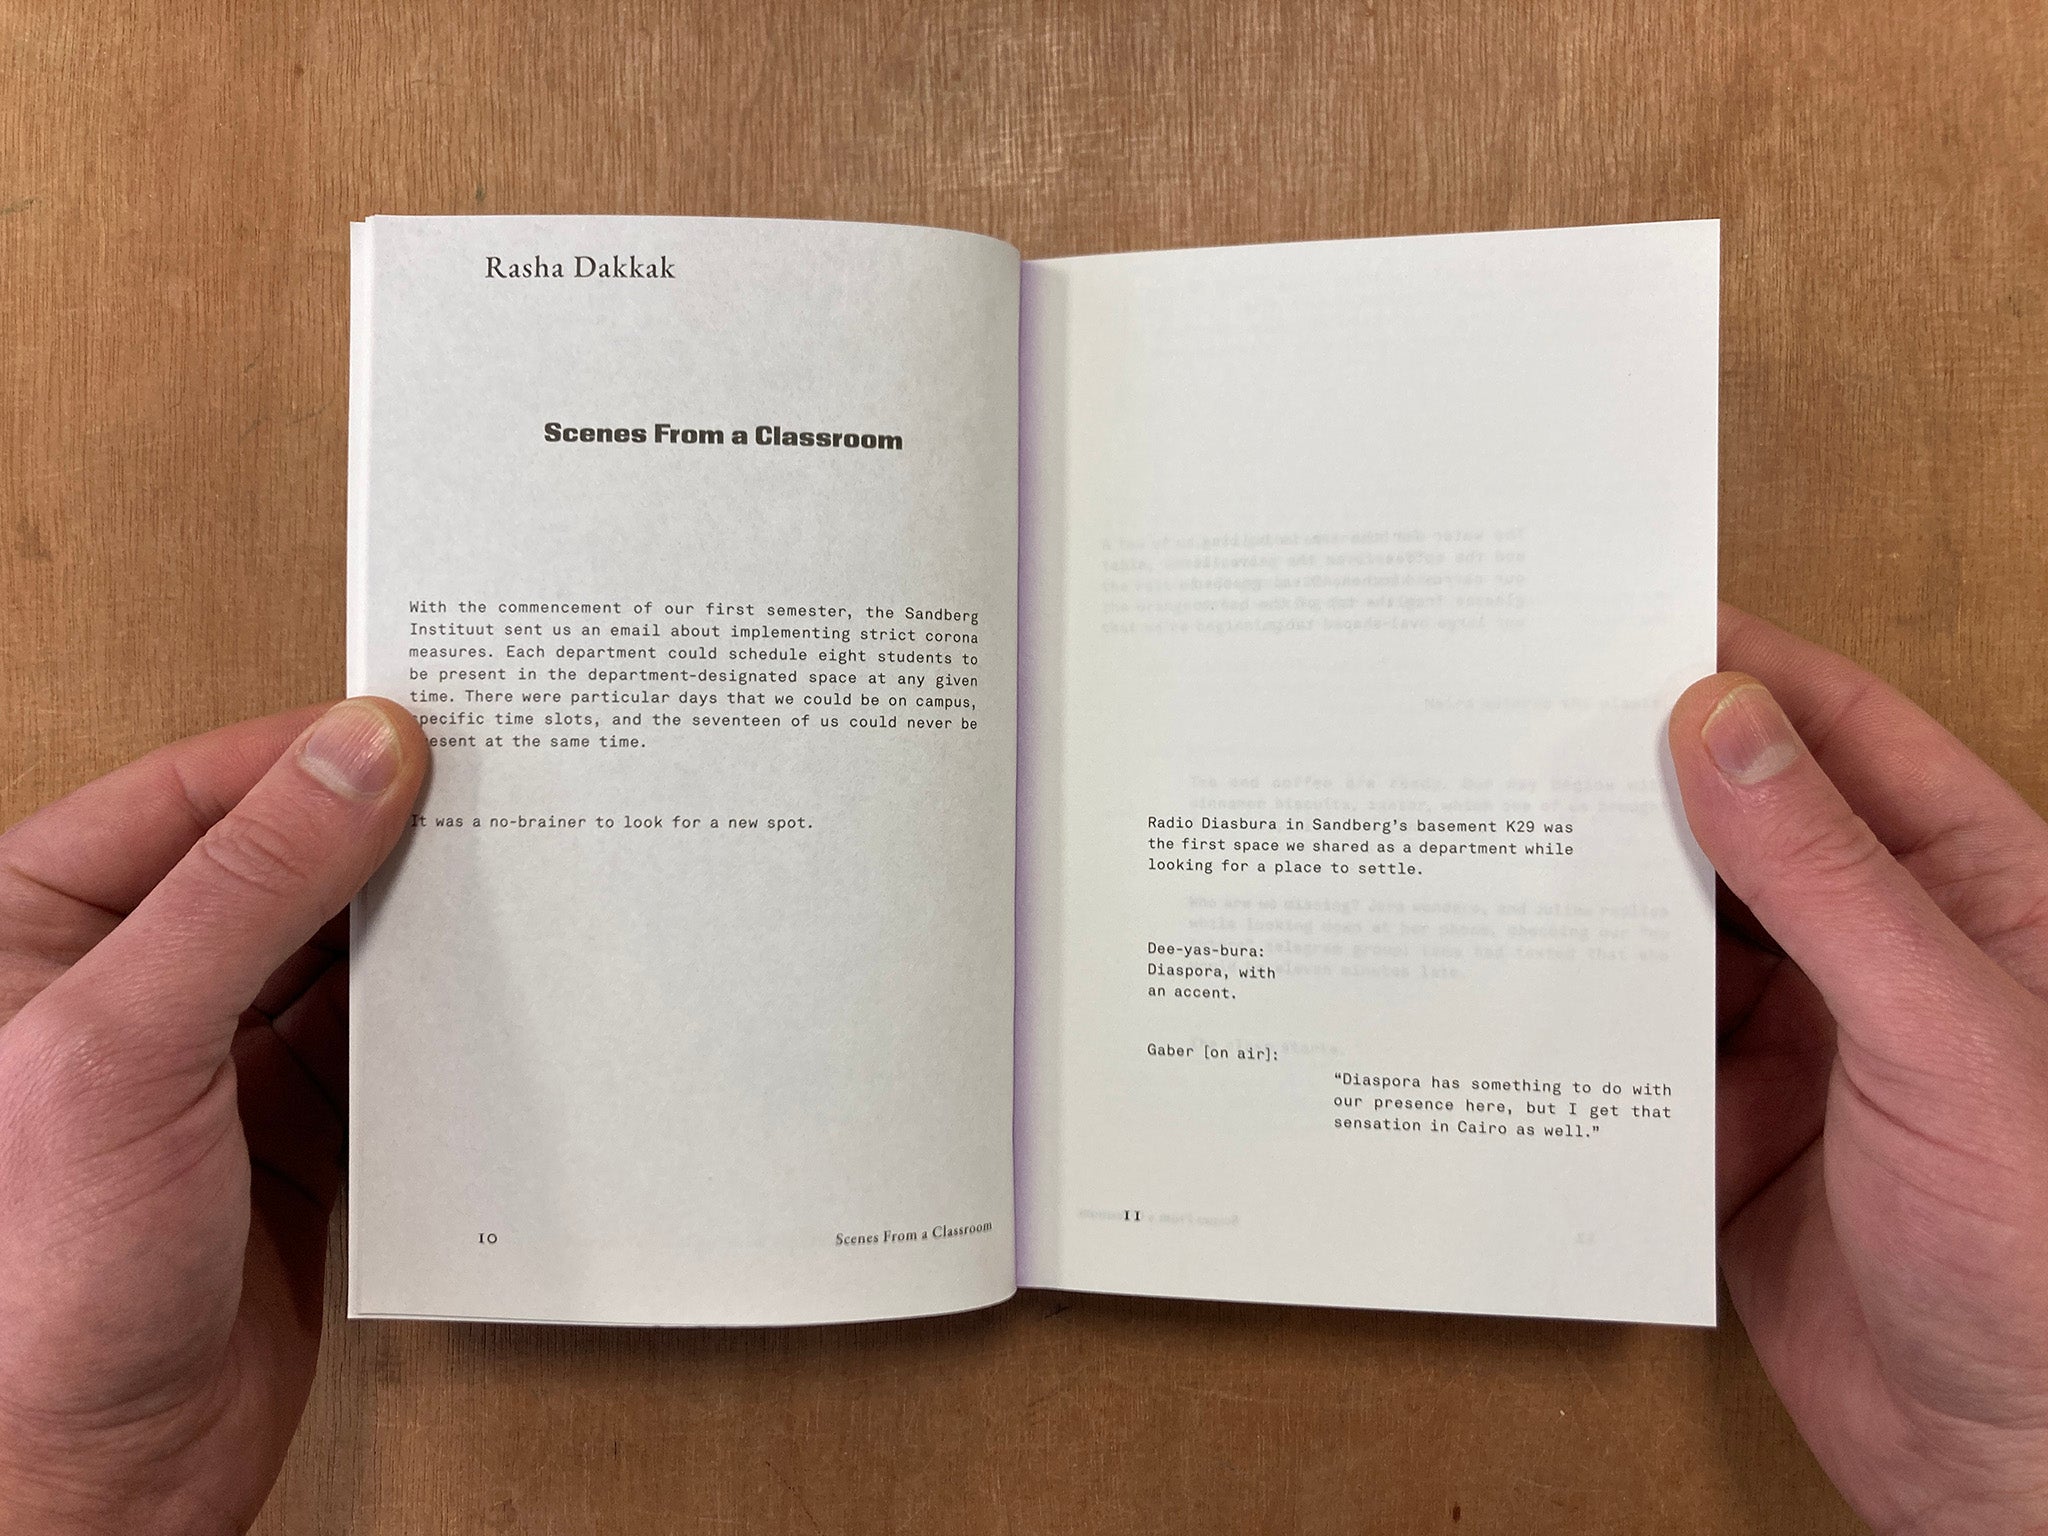 DURABLE DISCUSSIONS: ESSAYS FROM THE DISARMING DESIGN DEPARTMENT